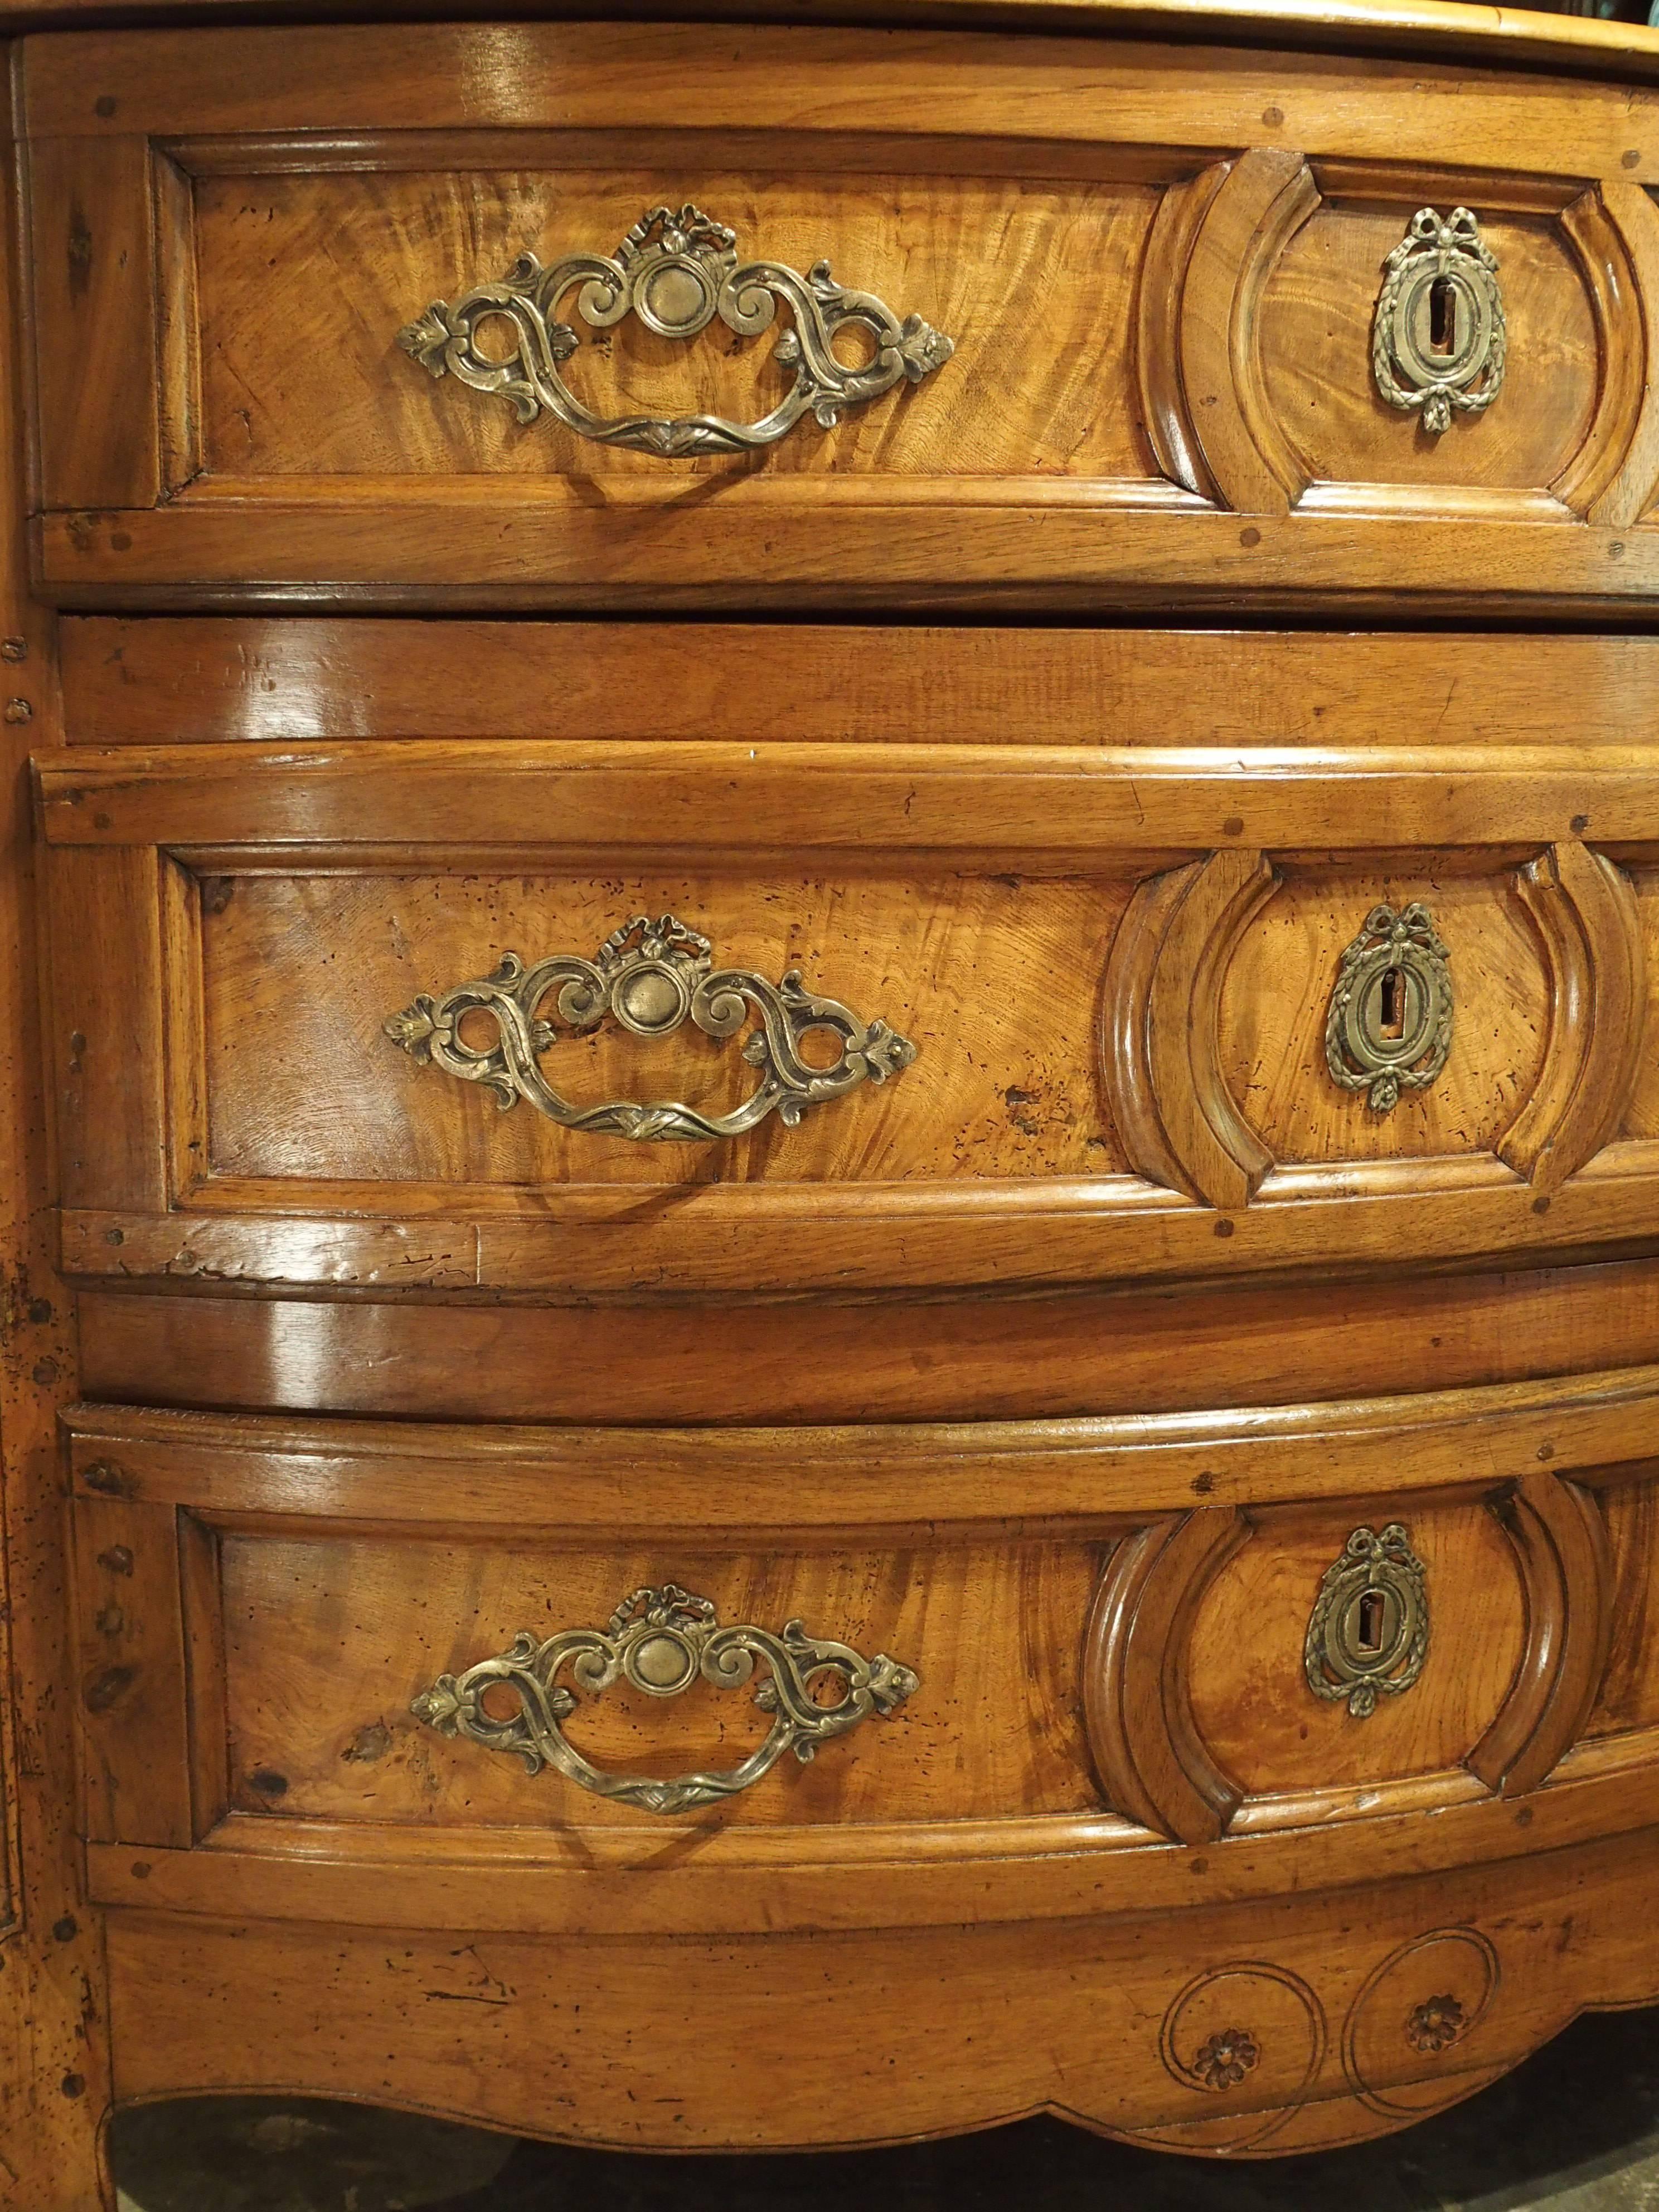 Walnut and burled walnut.

In 1700s France, the commode was considered the finest piece of furniture in the chateau. It was also placed in the most important areas so it could be seen. This particular commode from Bourgogne or Vallee du Rhone